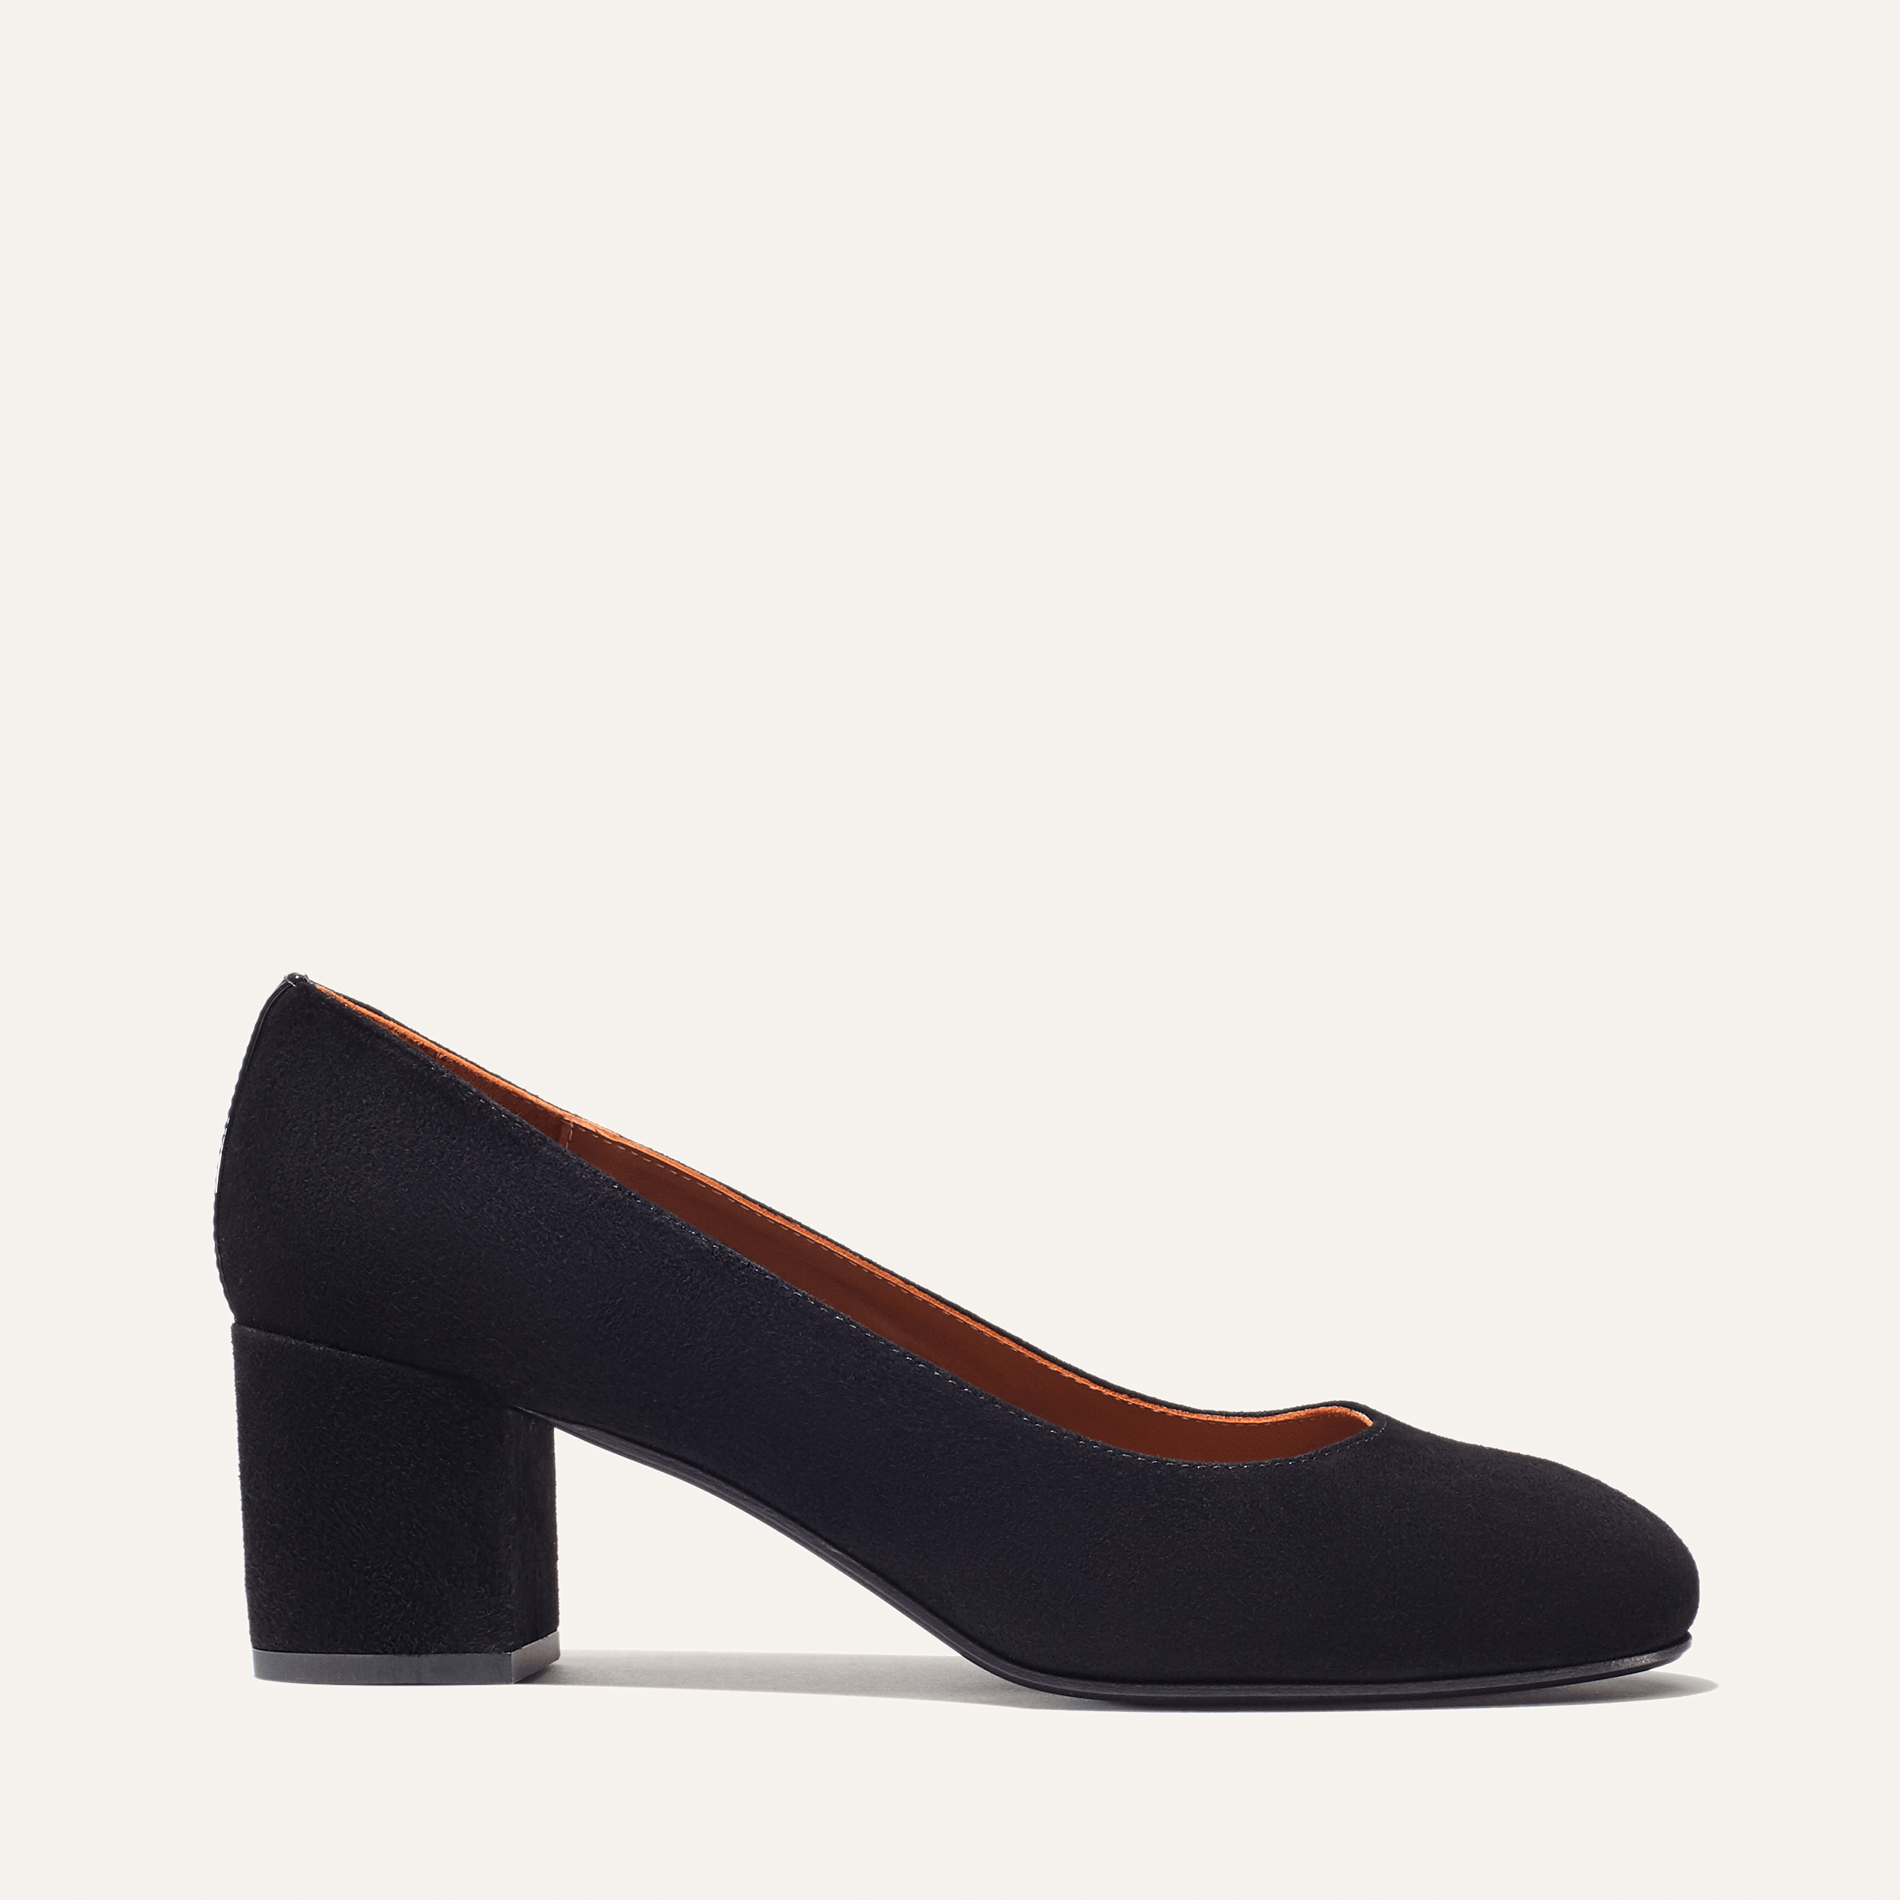 Truffle Collection block heeled pointed shoes in black | ASOS